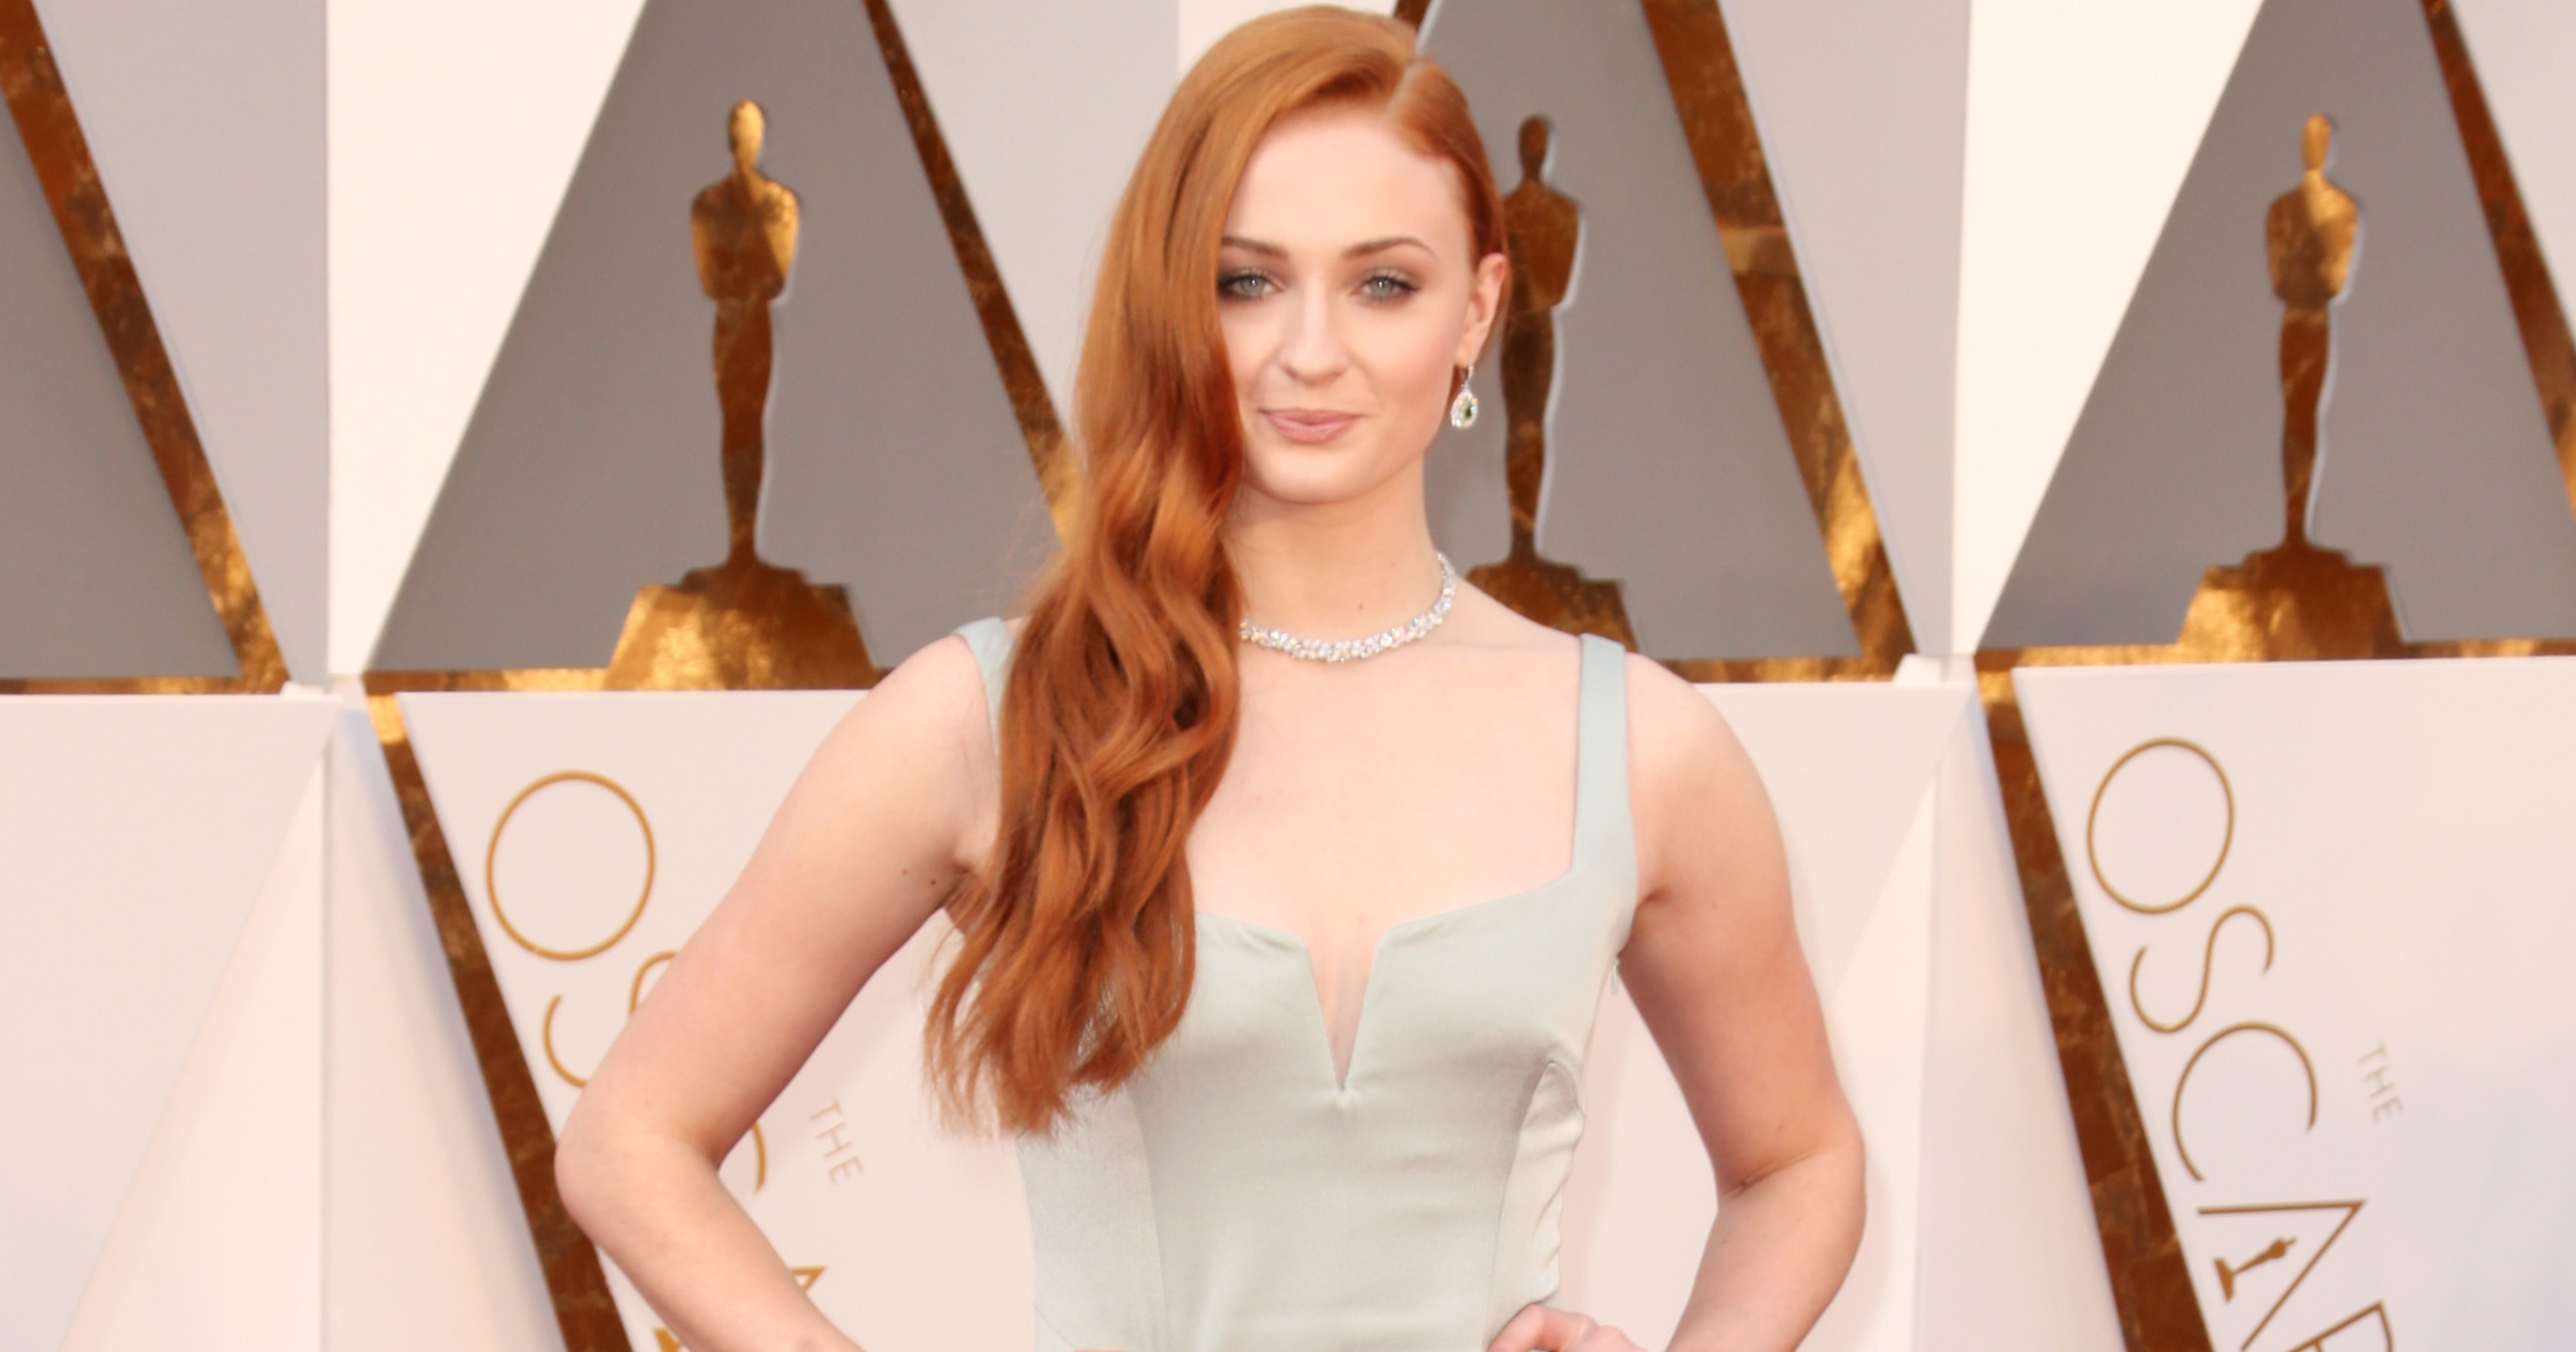 Sophie Turner attends the 88th Annual Academy Awards on Feb. 28, 2016 in Hollywood, Calif. (Todd Williamson—Getty Images)